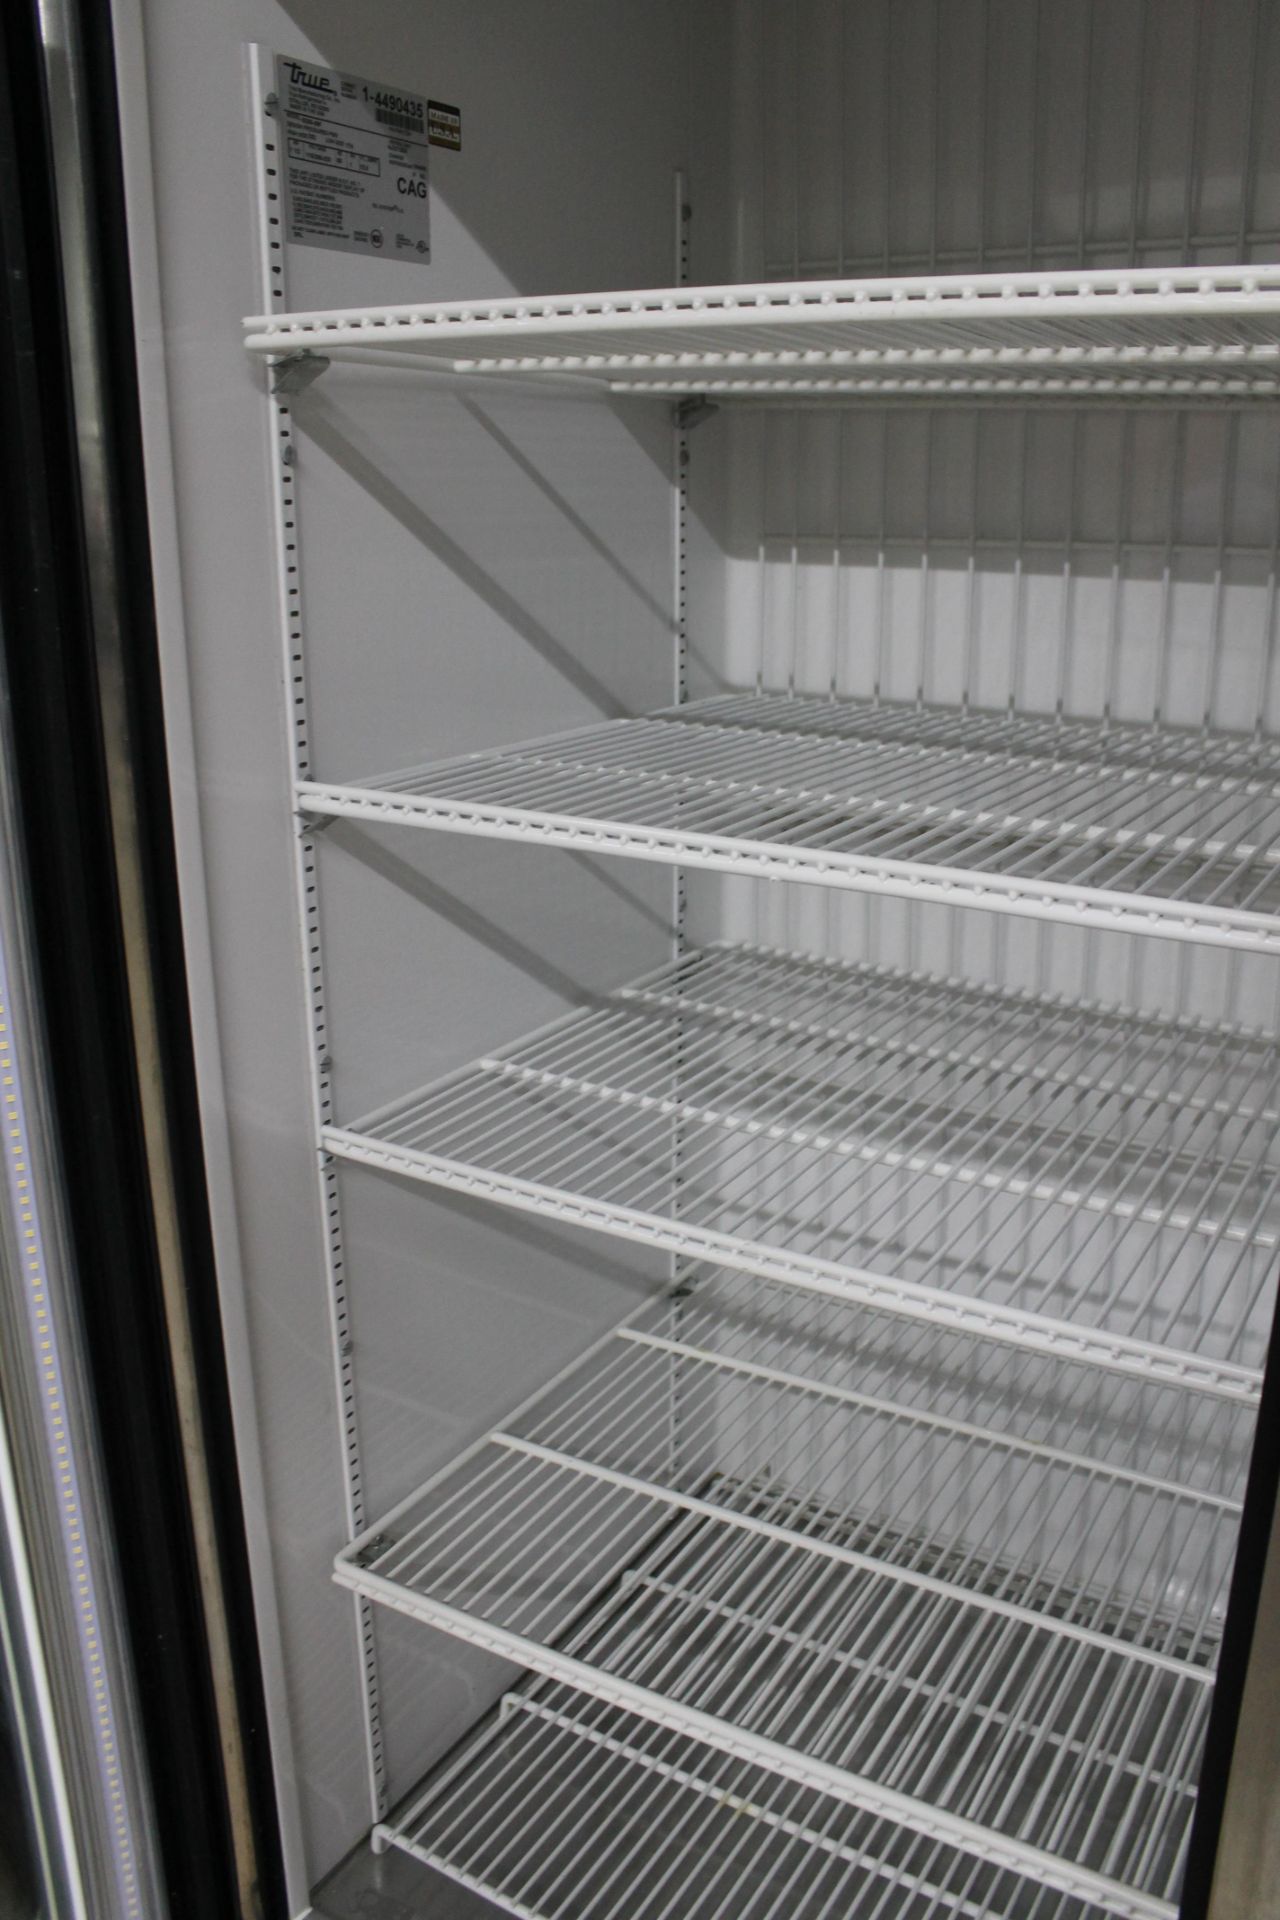 USED SWING DOOR REFRIGERATOR WITH HYDROCARBON REFRIGERANT - Image 4 of 4